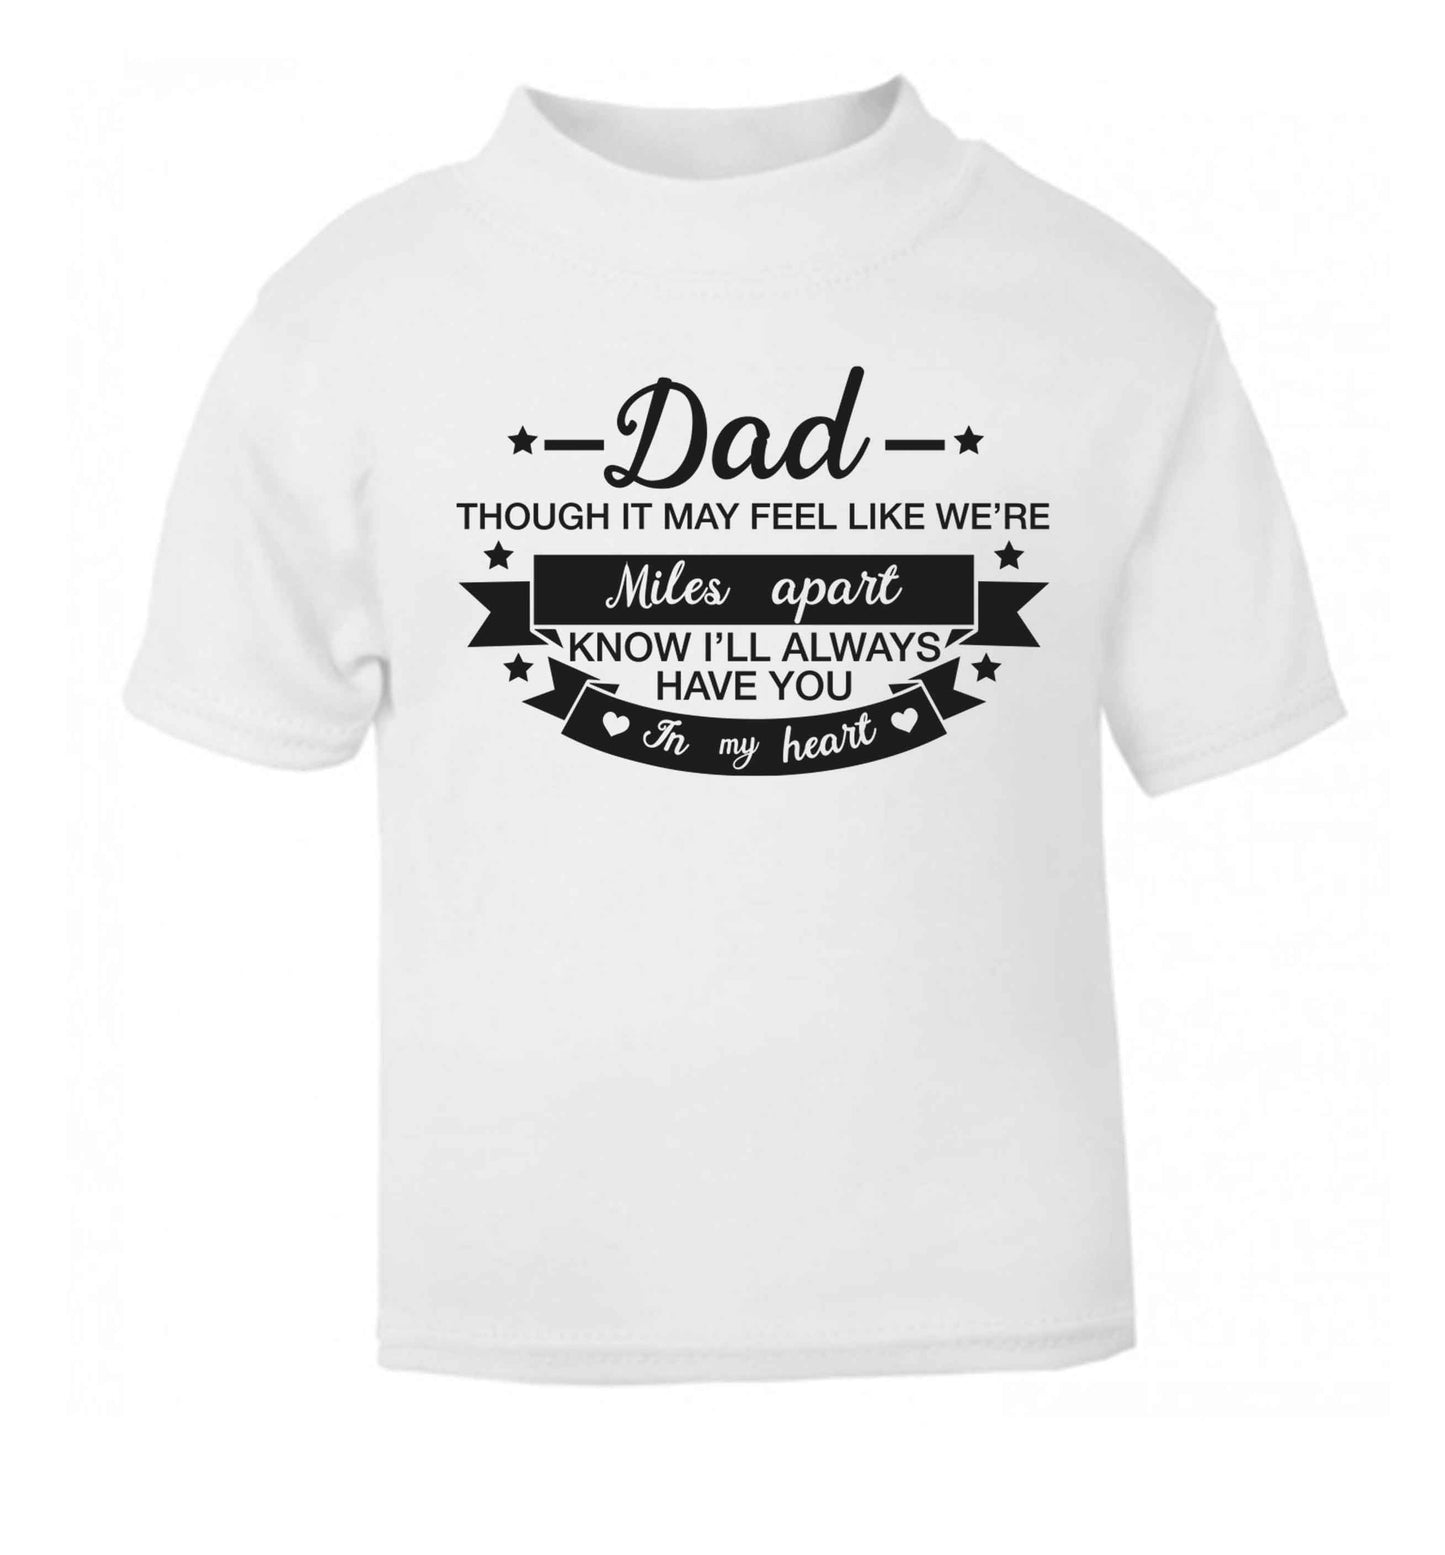 Dad though it may feel like we're miles apart know I'll always have you in my heart white baby toddler Tshirt 2 Years